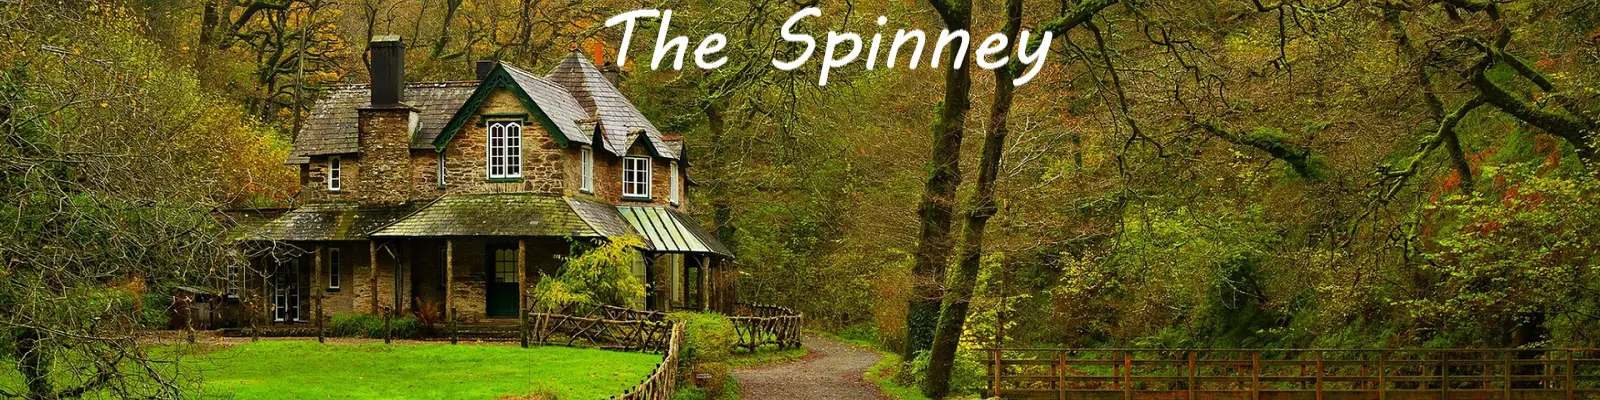 The Spinney main image